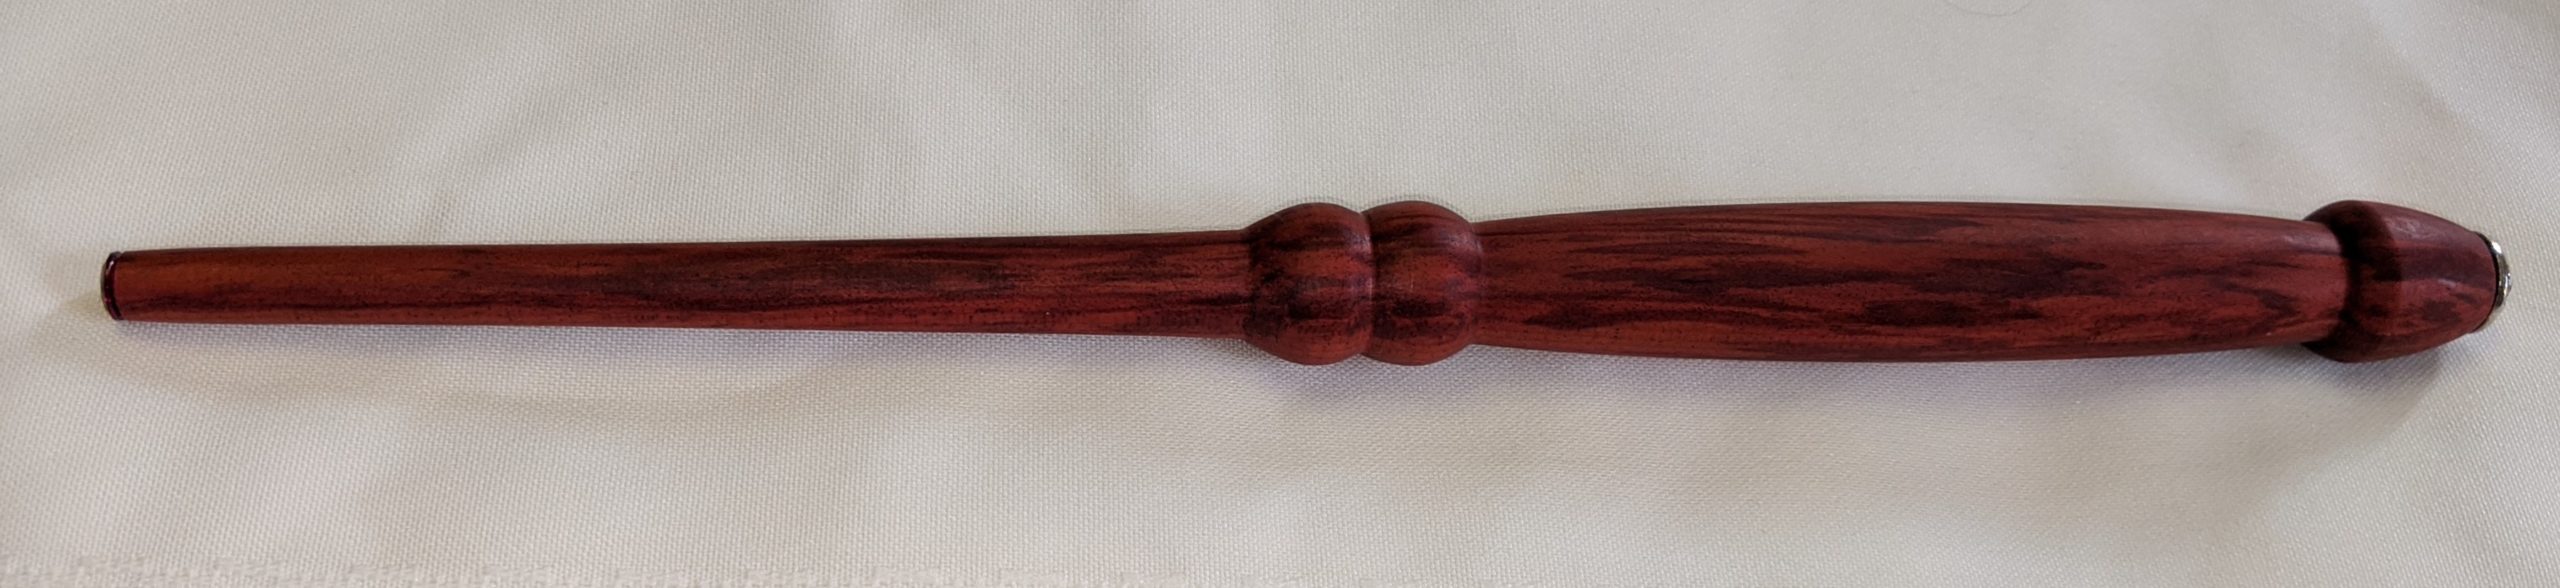 12-Inch Ruby, Bloodwood, and Steel Wand